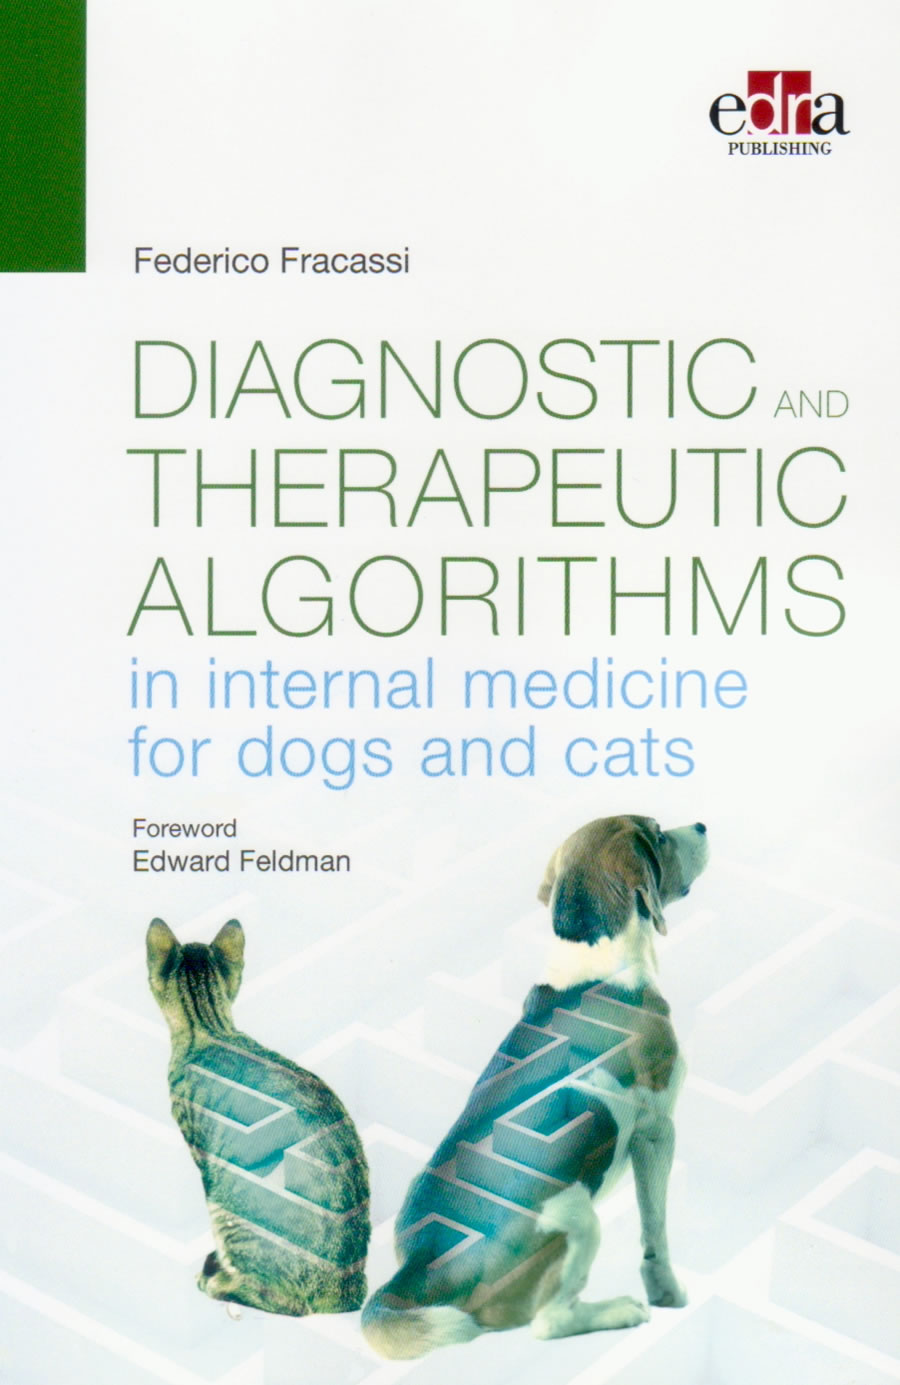 Diagnostic and therapeutic algorithms in internal medicine for dogs and cats